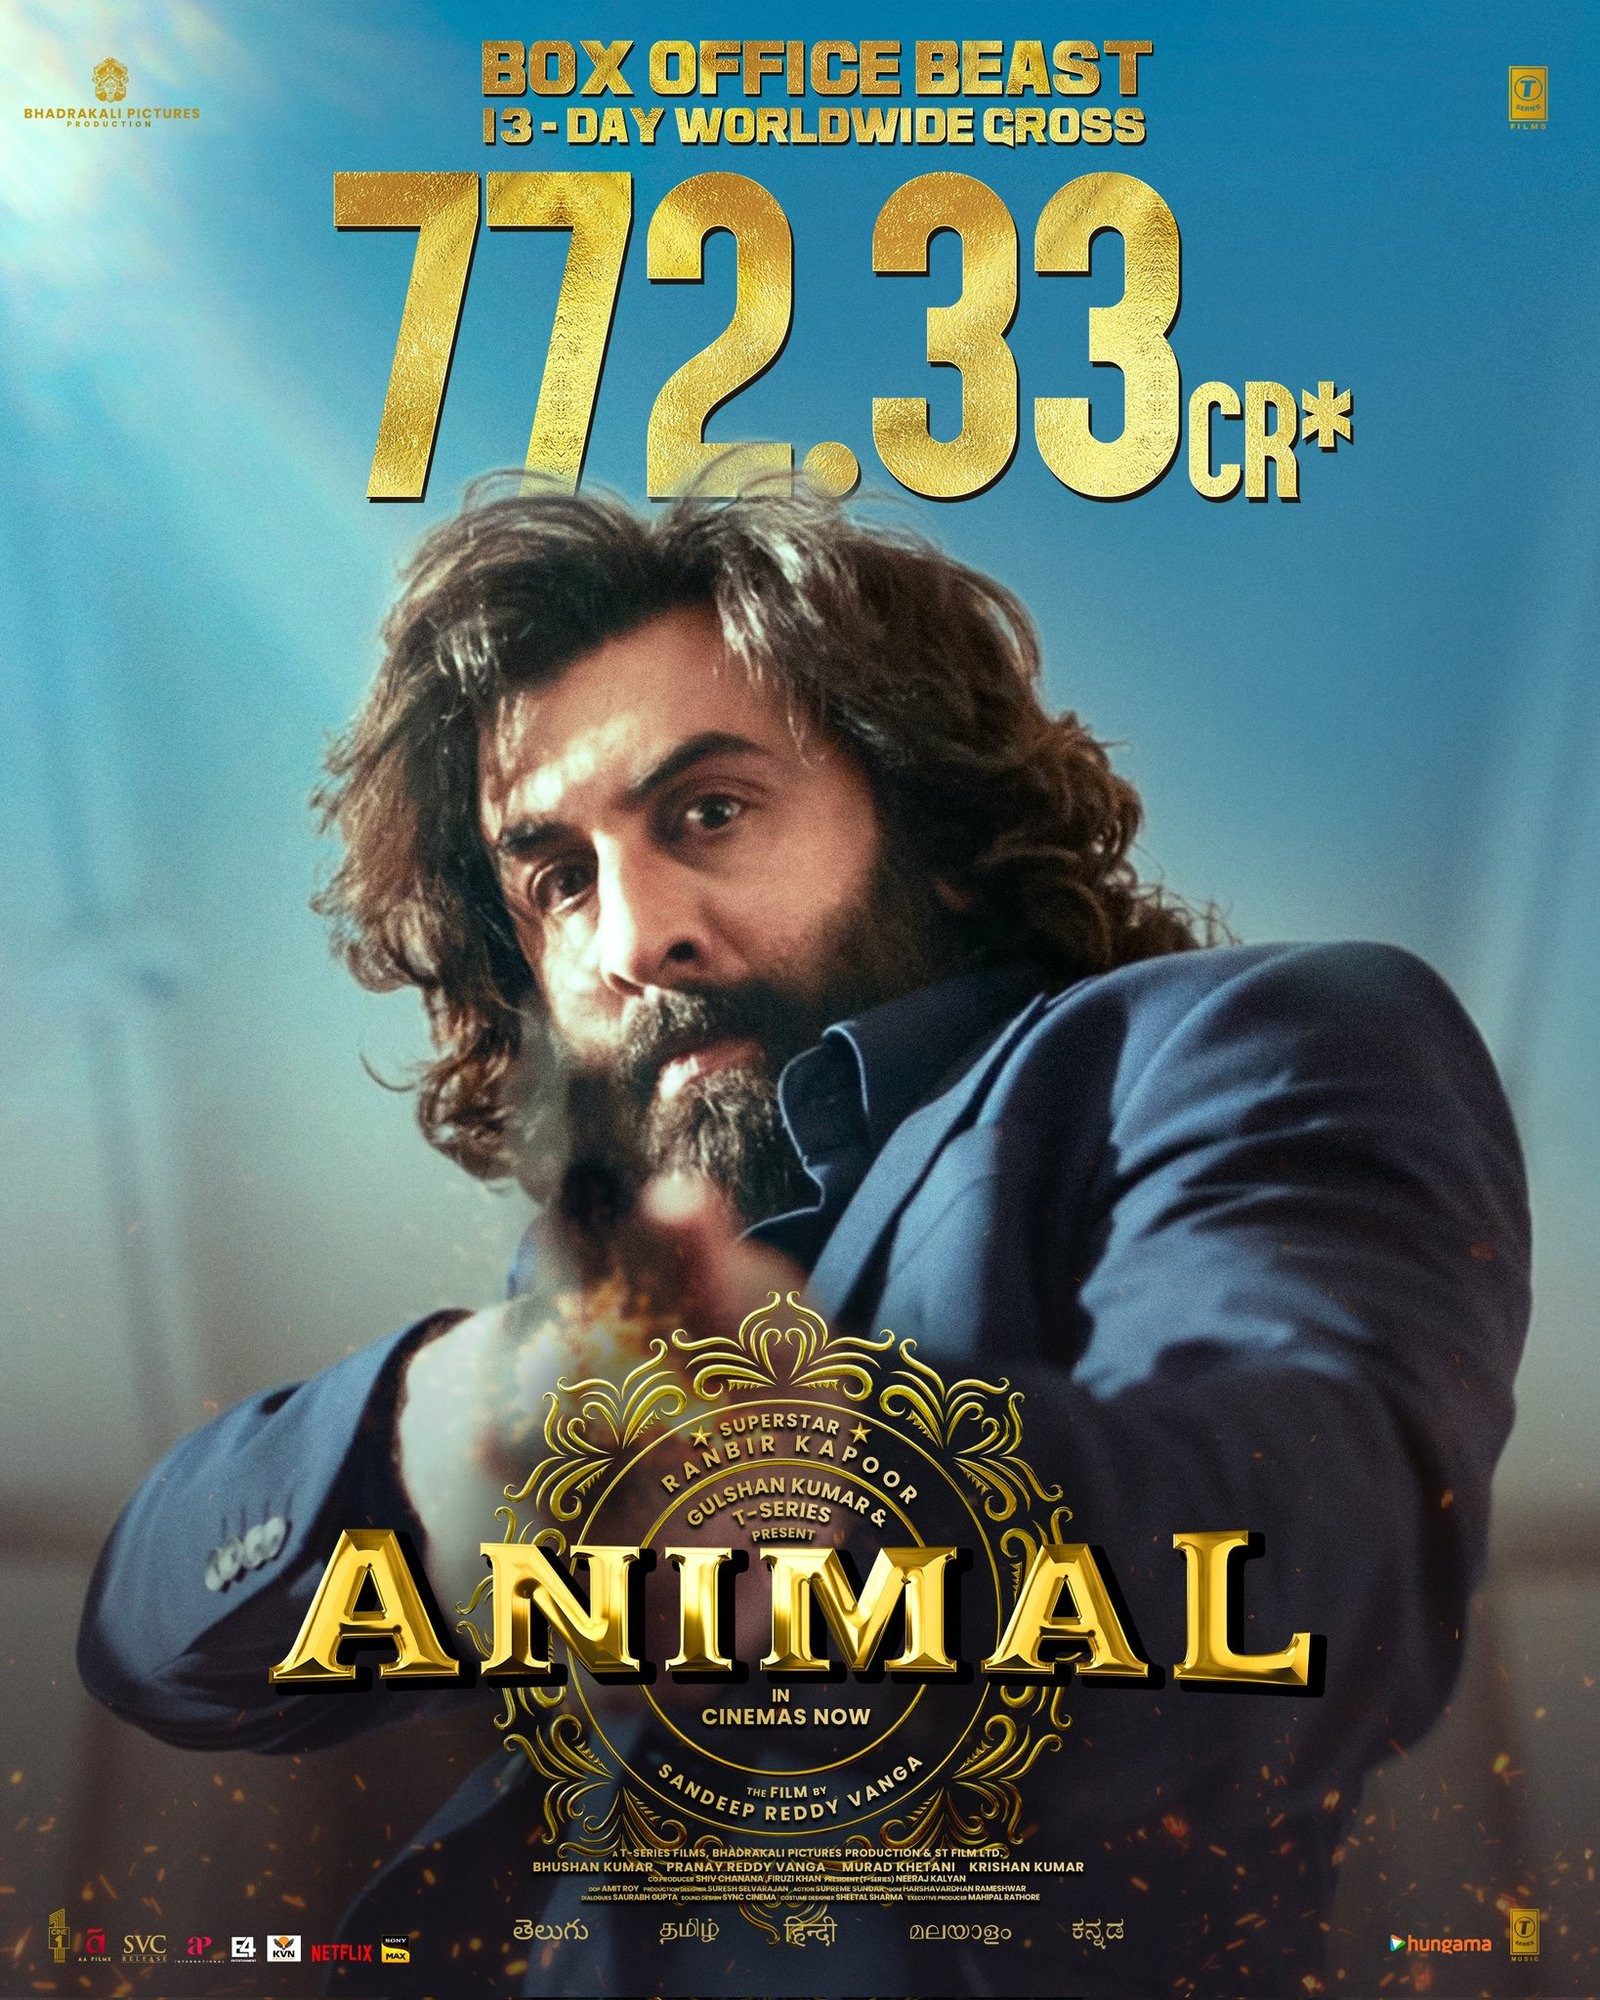 Animal continues to perform brilliantly at the box office, Ranbir Kapoor's film reaches Rs 800 crore worldwide